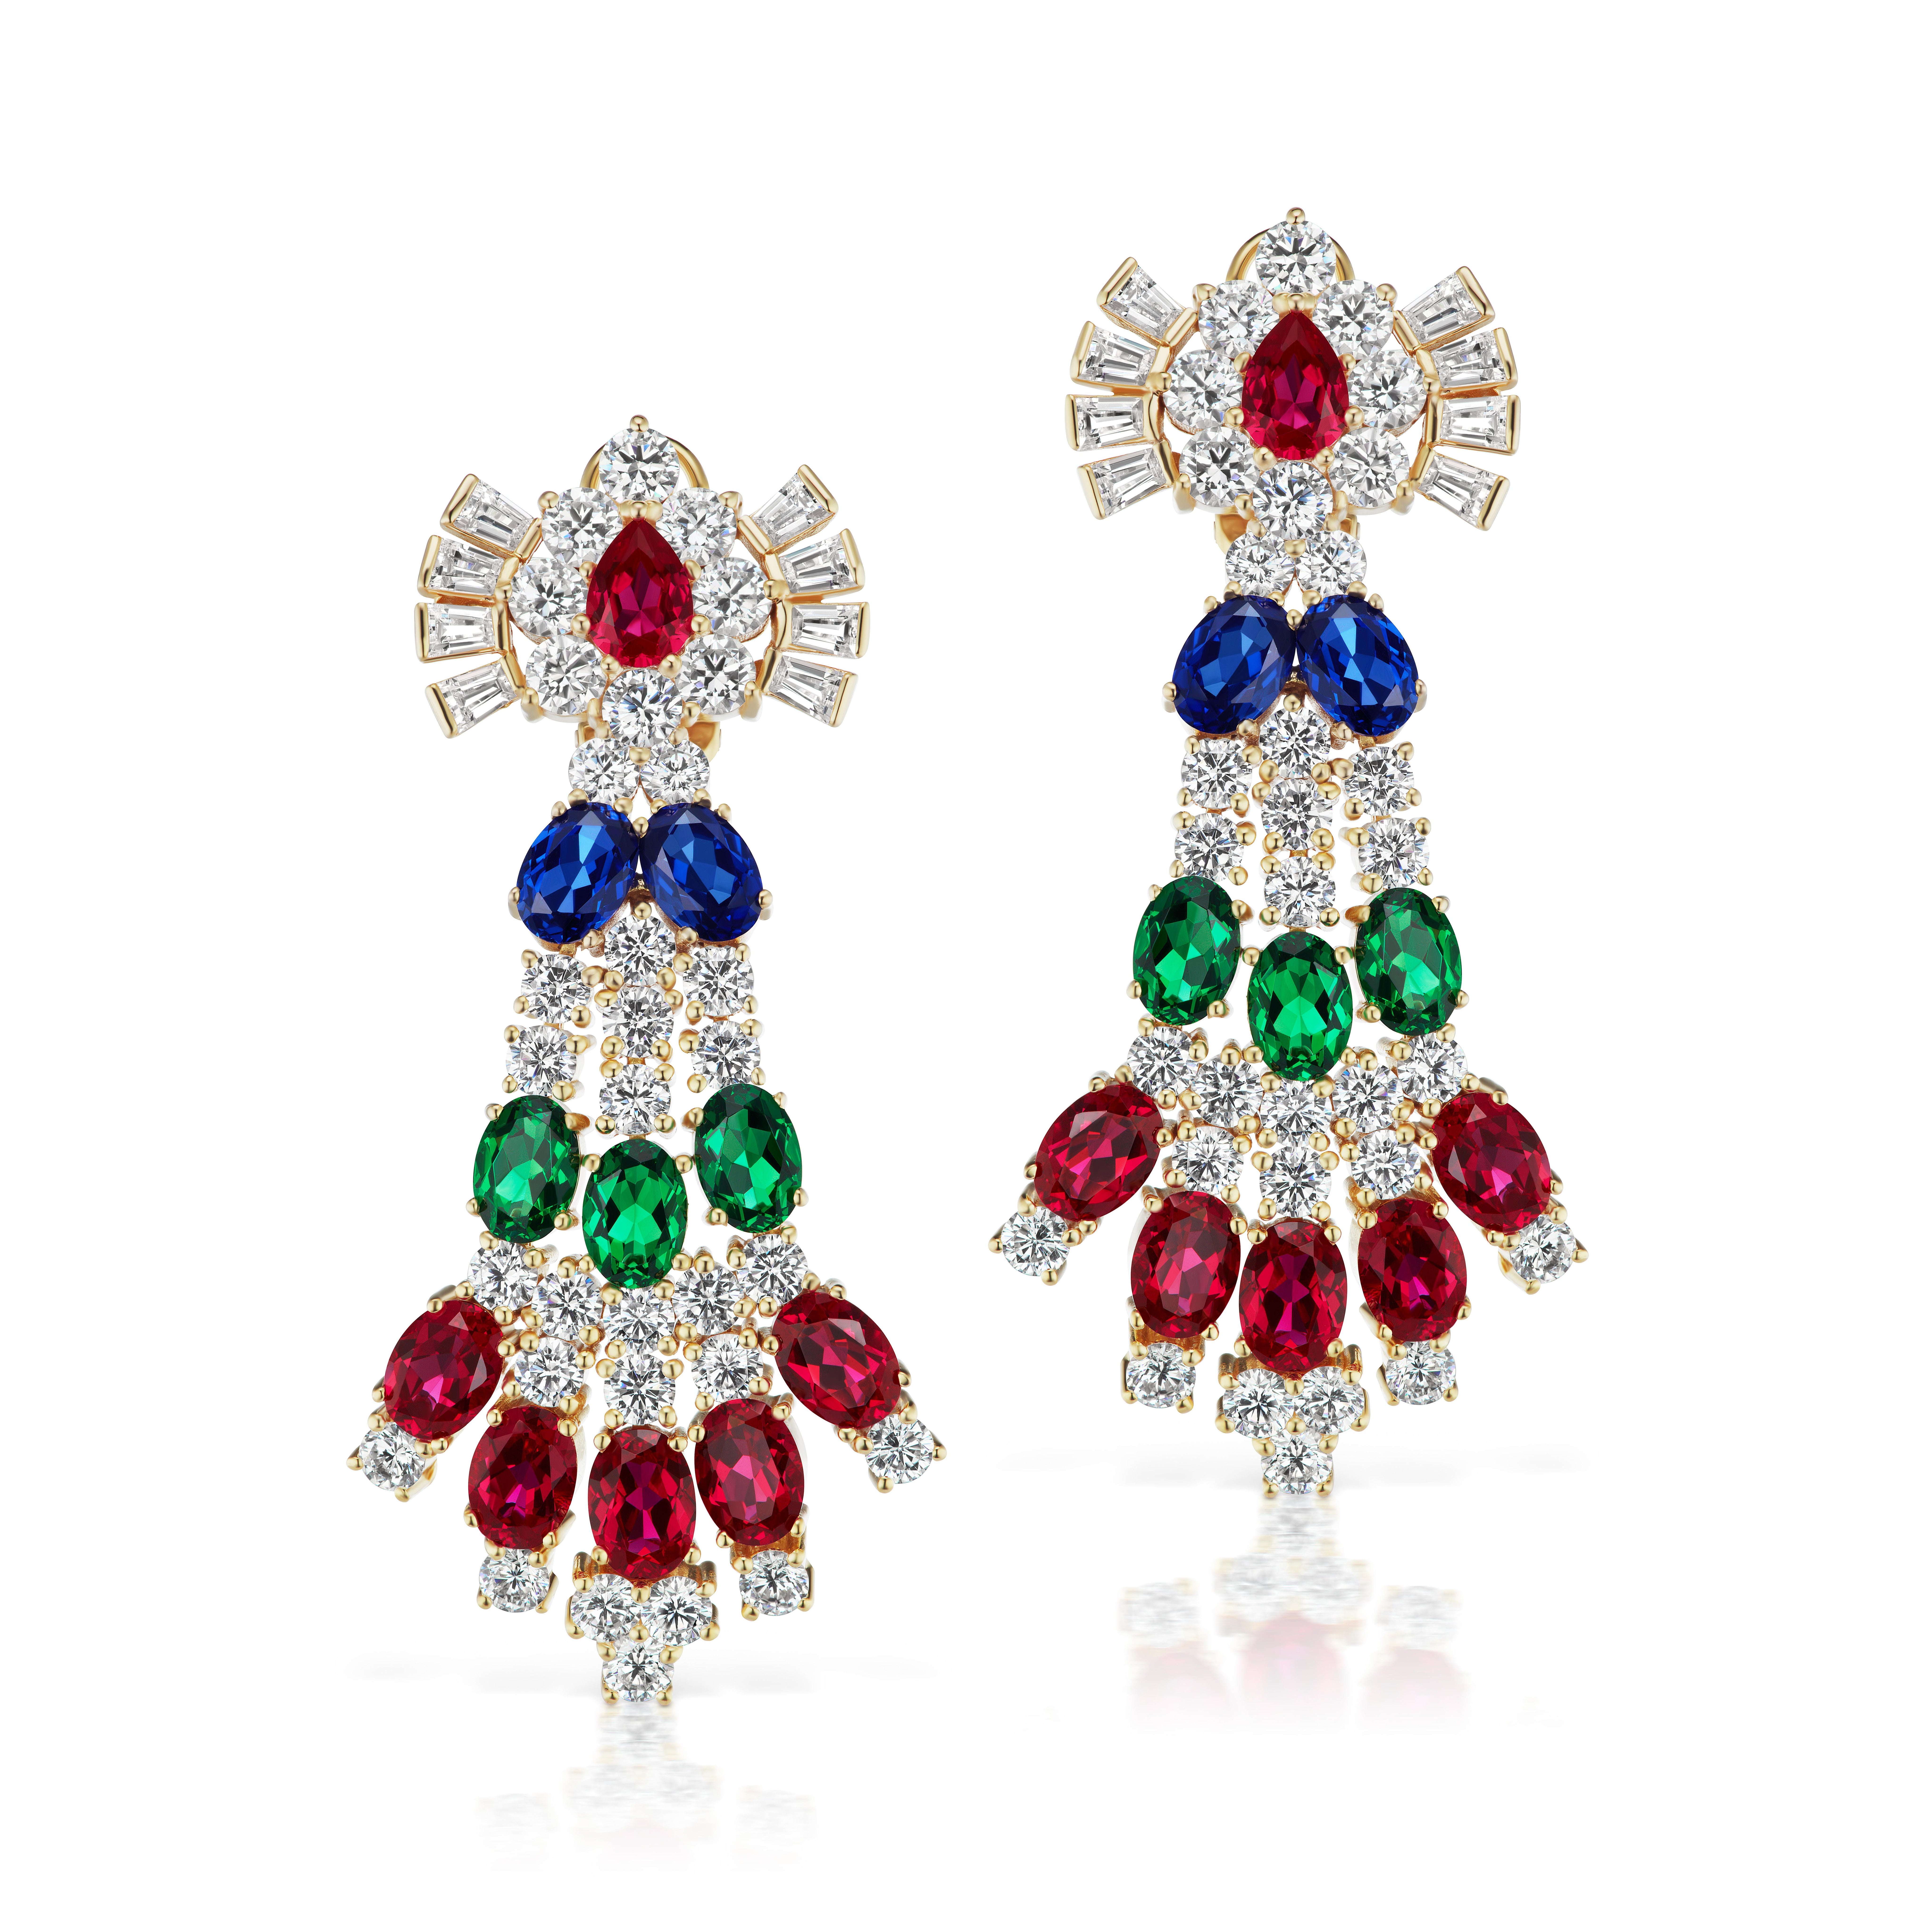 Magnificent  Costume Jewelry Stunning Cubic Zirconia Emerald Ruby Sapphire Vermeil Earrings Set With Stunning Real Looking Man Made Colored Gems And Cubic Zirconia Mounted In Vermeil Sterling.  Clip Post Fitting. Two Inches Long 1.25 inches wide at